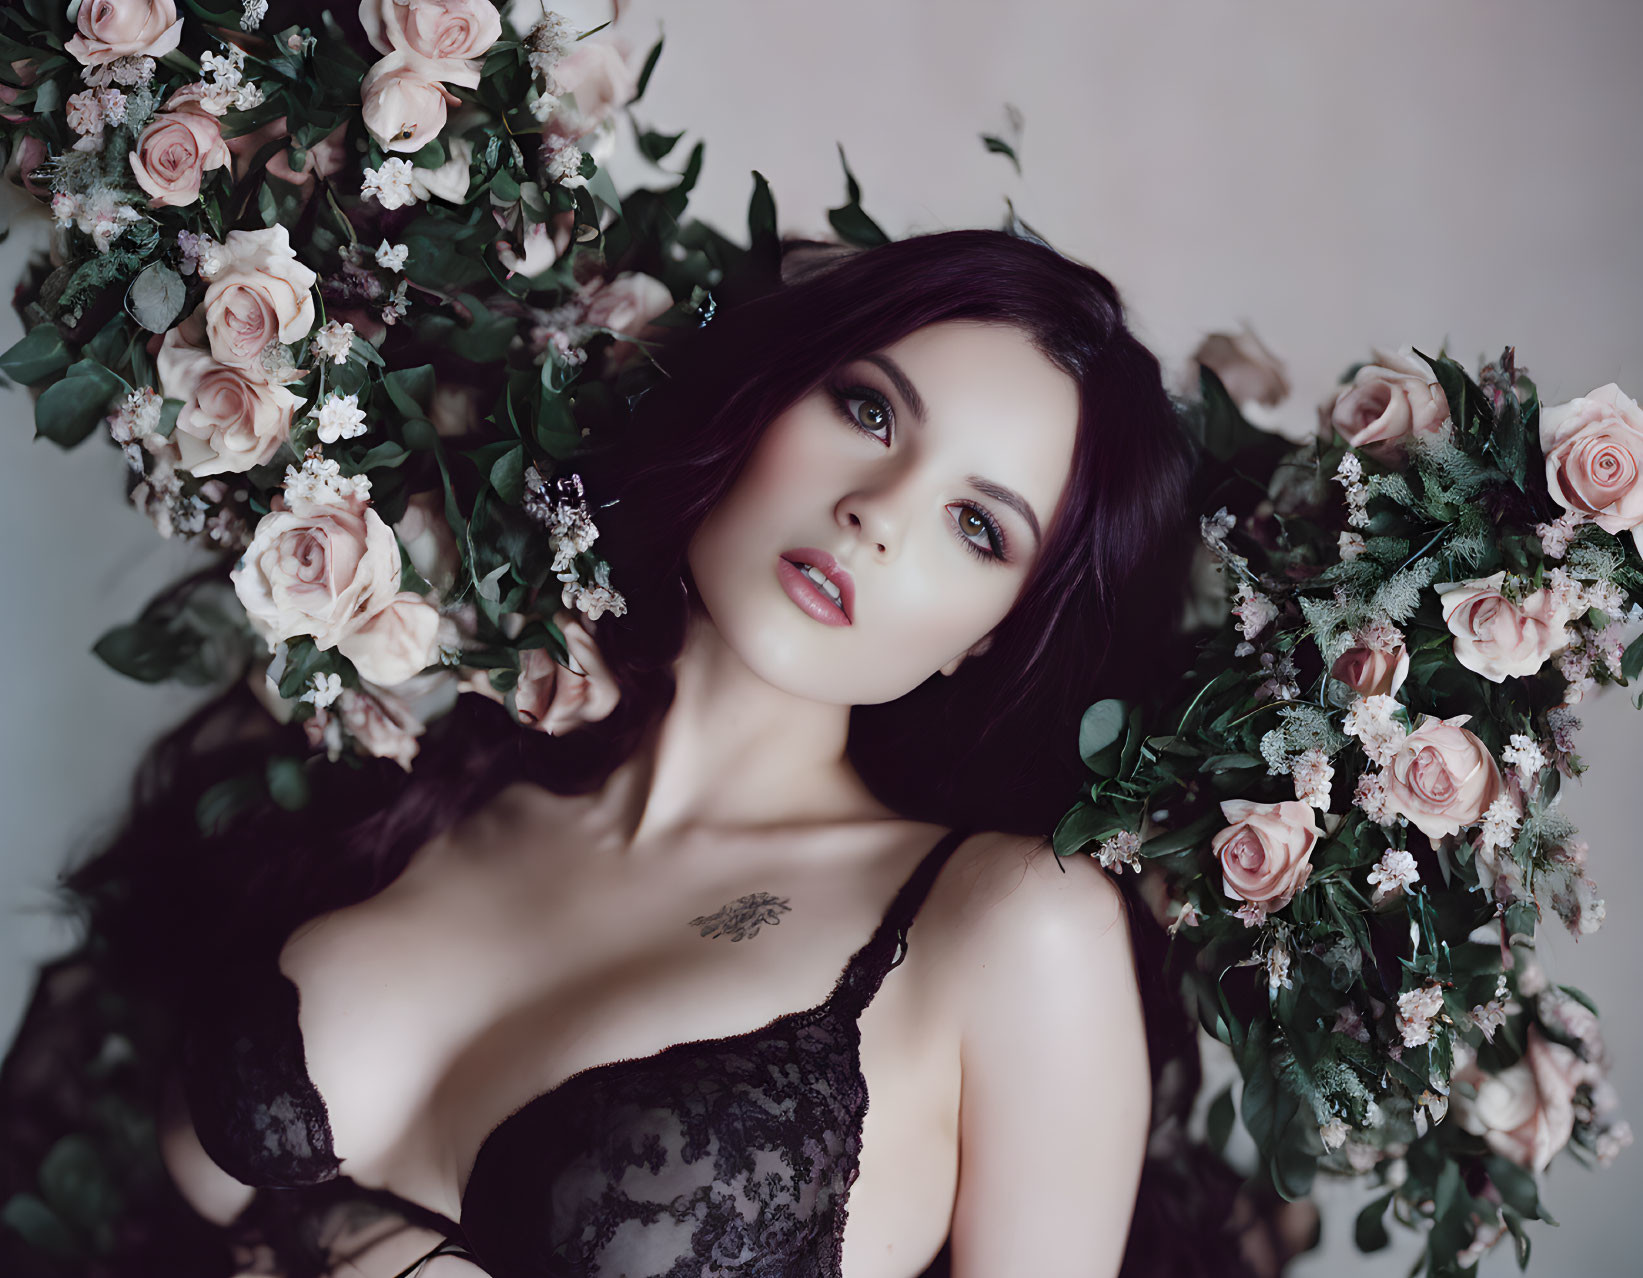 Dark-haired woman in black lace under floral arch gazes at camera